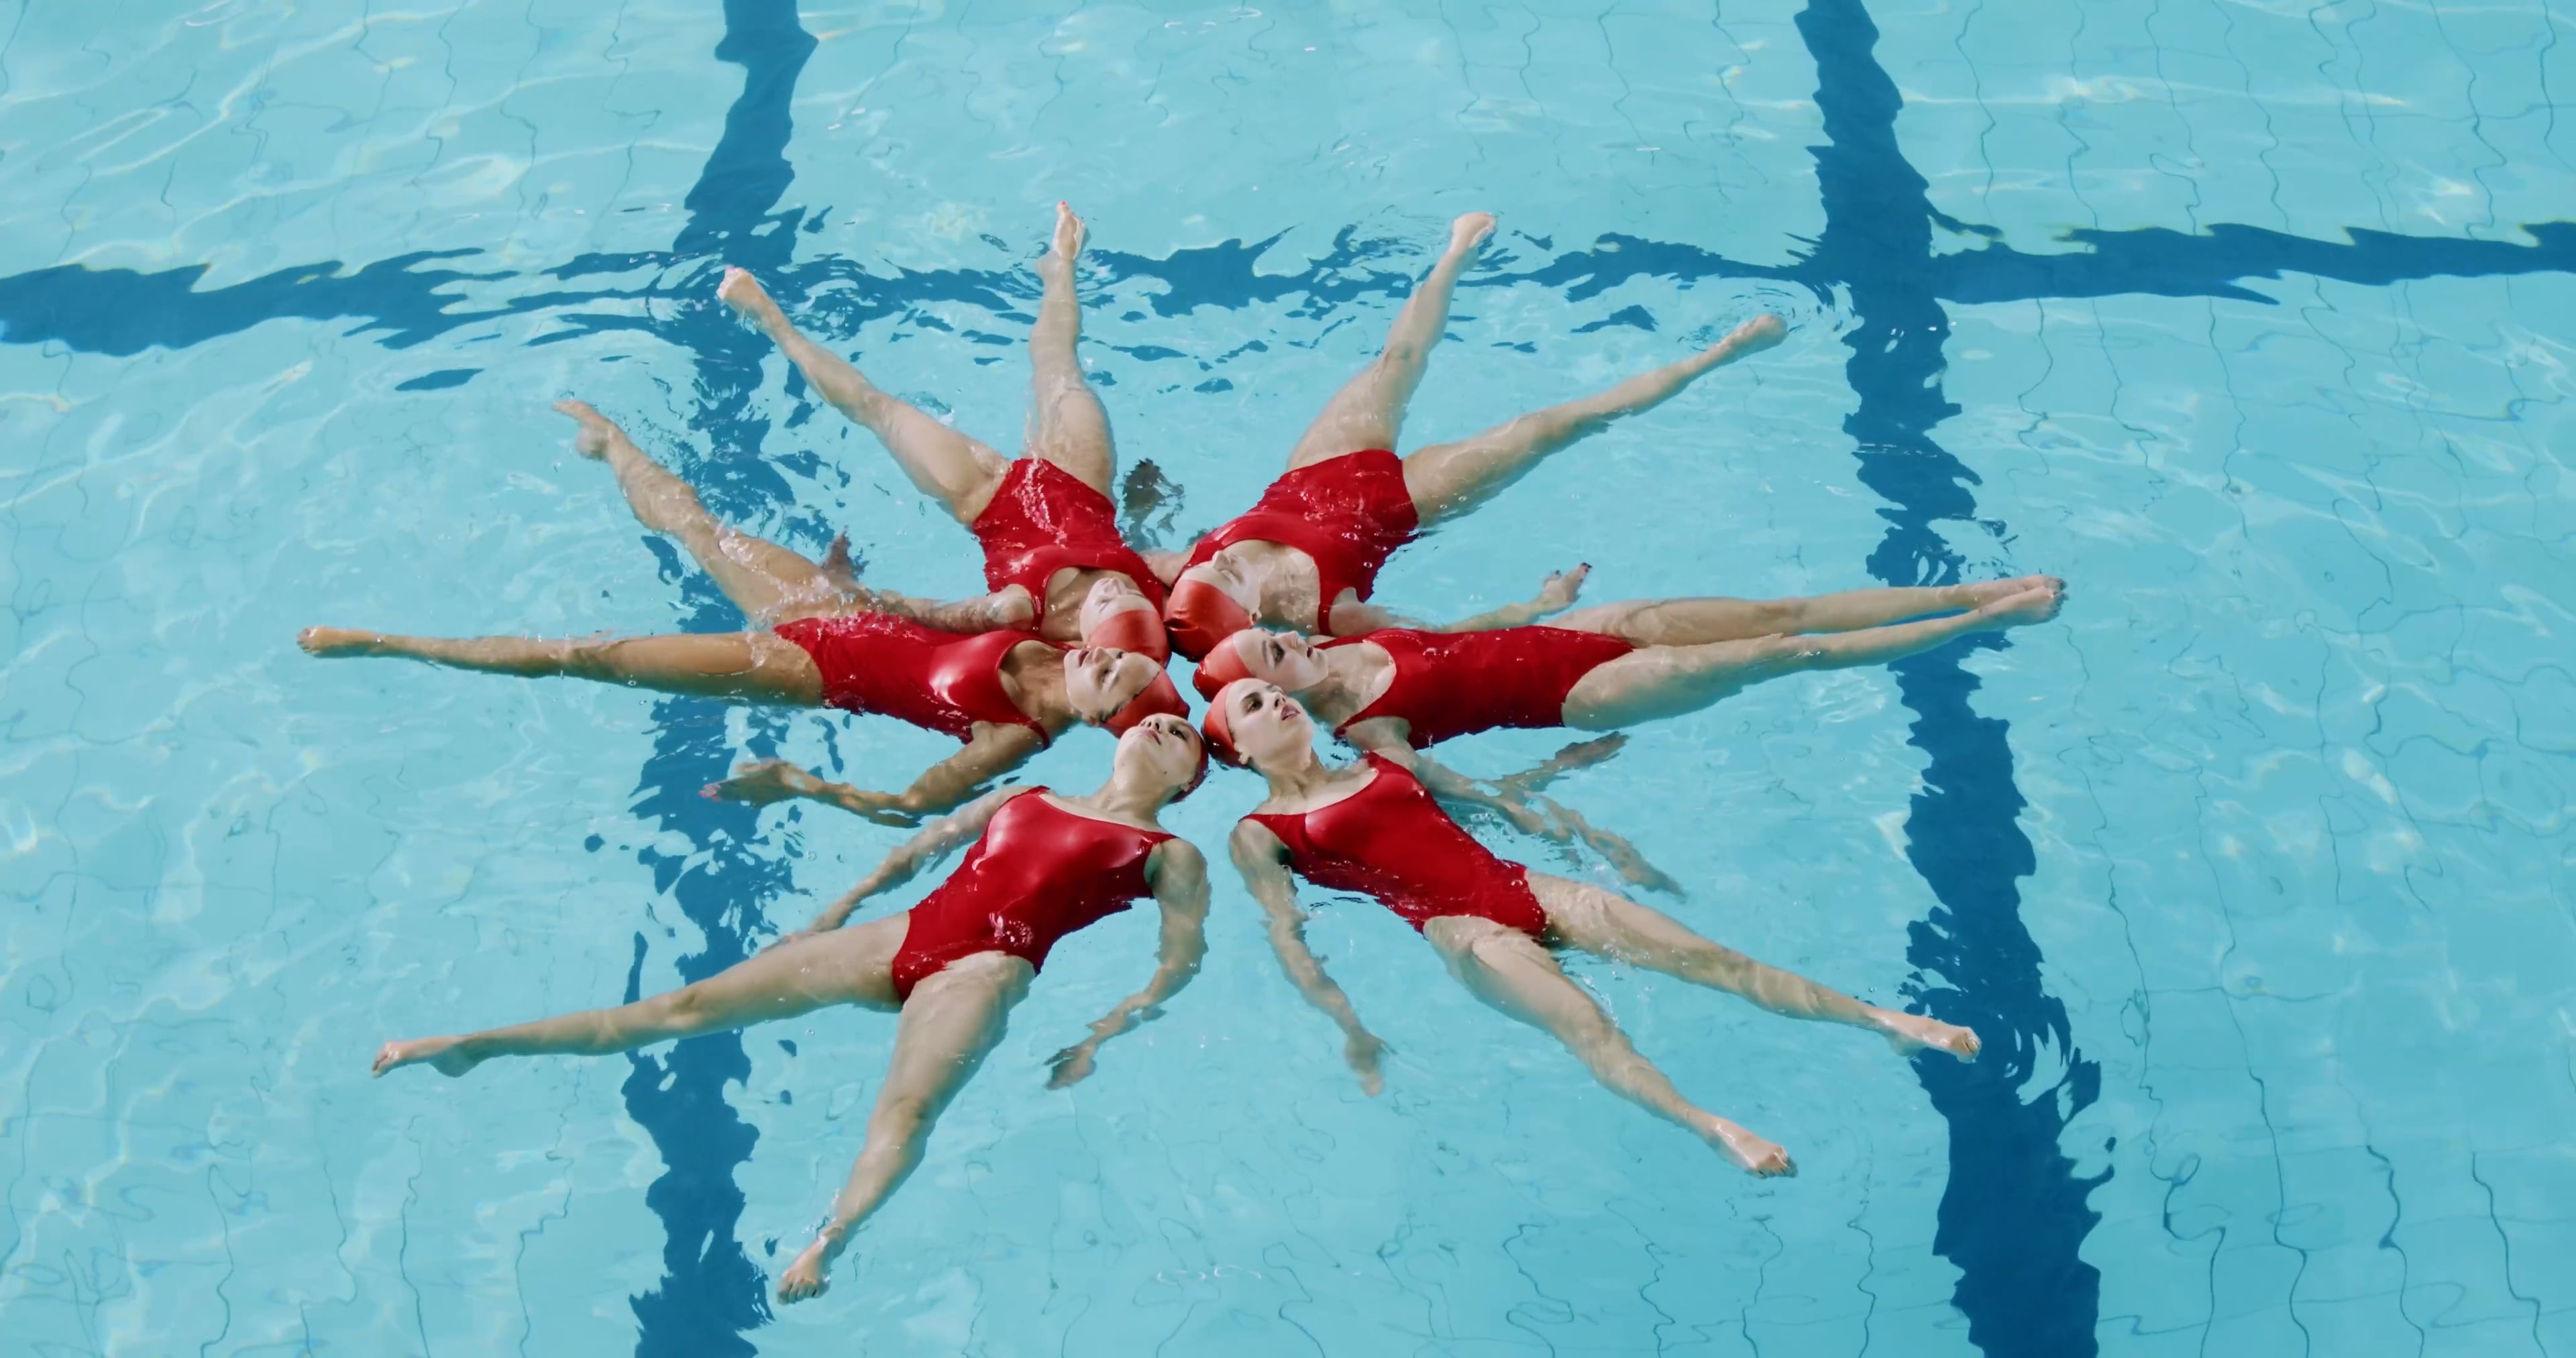 Synchronized Swimming: A competitive water sport where swimmers perform a synchronized choreographed routine, accompanied by music. 3840x2030 HD Wallpaper.